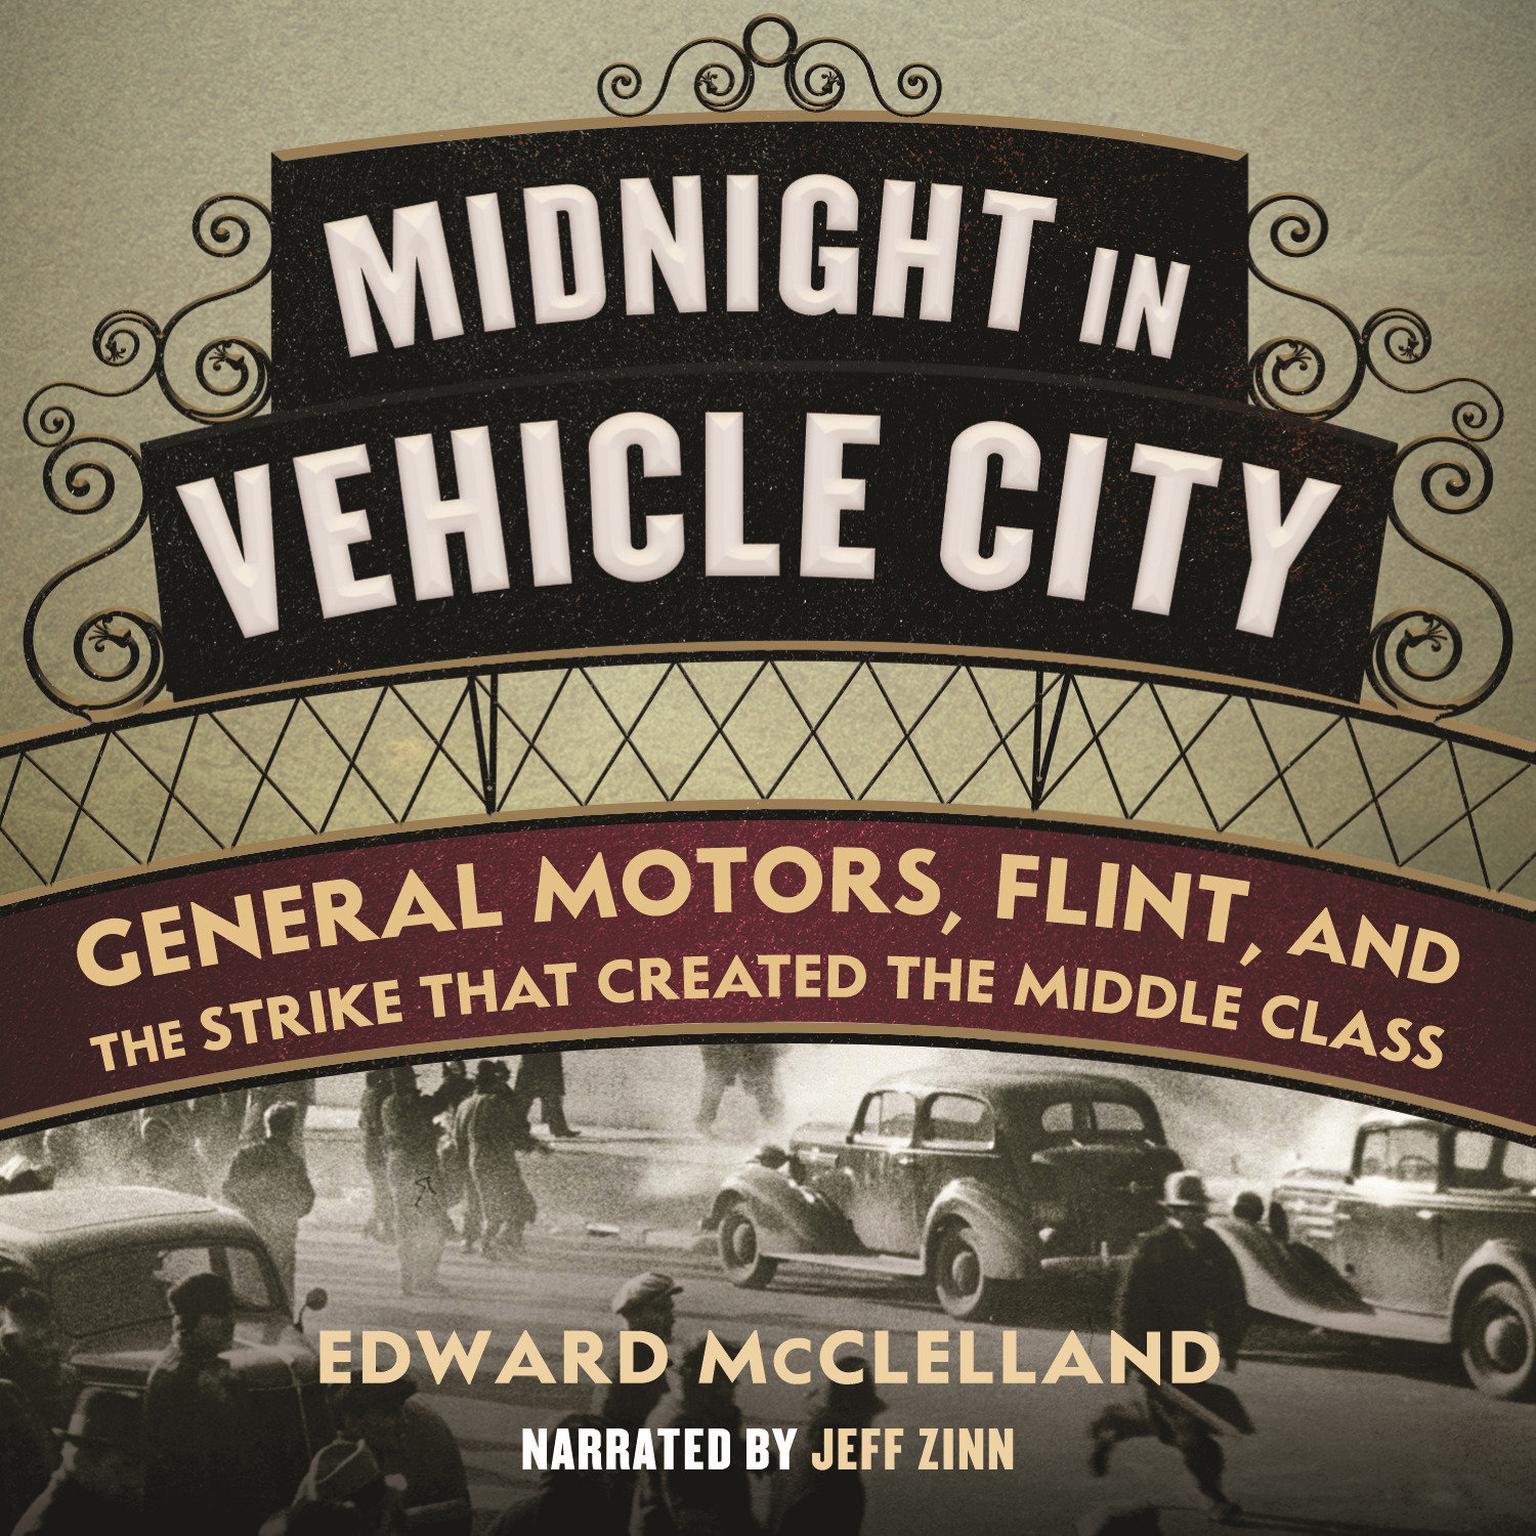 Midnight in Vehicle City: General Motors, Flint, and the Strike That Created the Middle Class Audiobook, by Edward McClelland